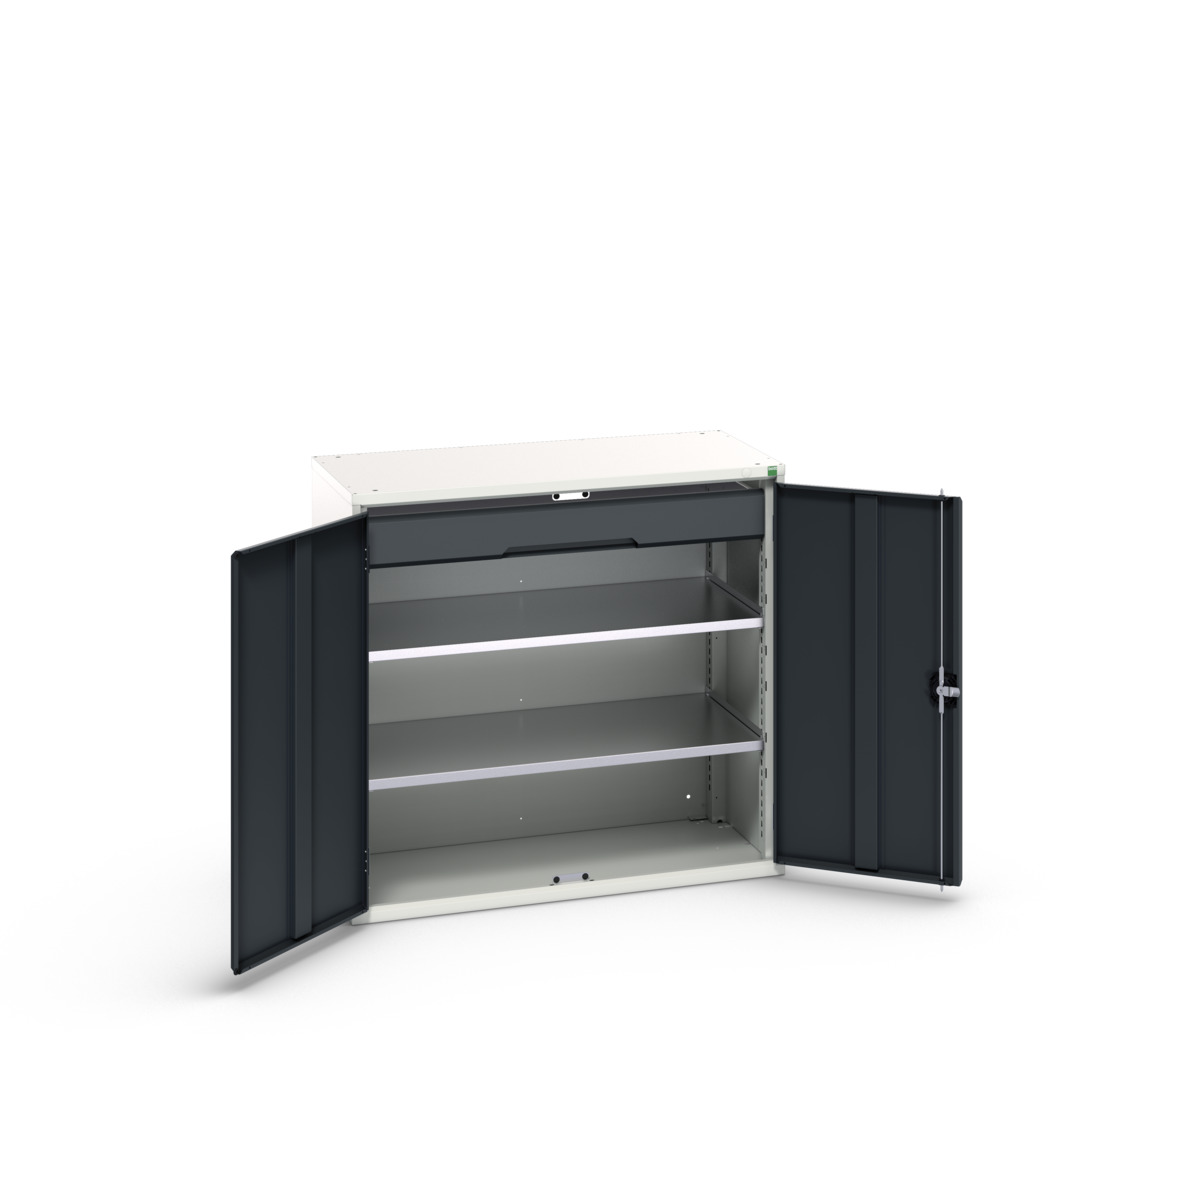 16926552.19 - verso kitted cupboard